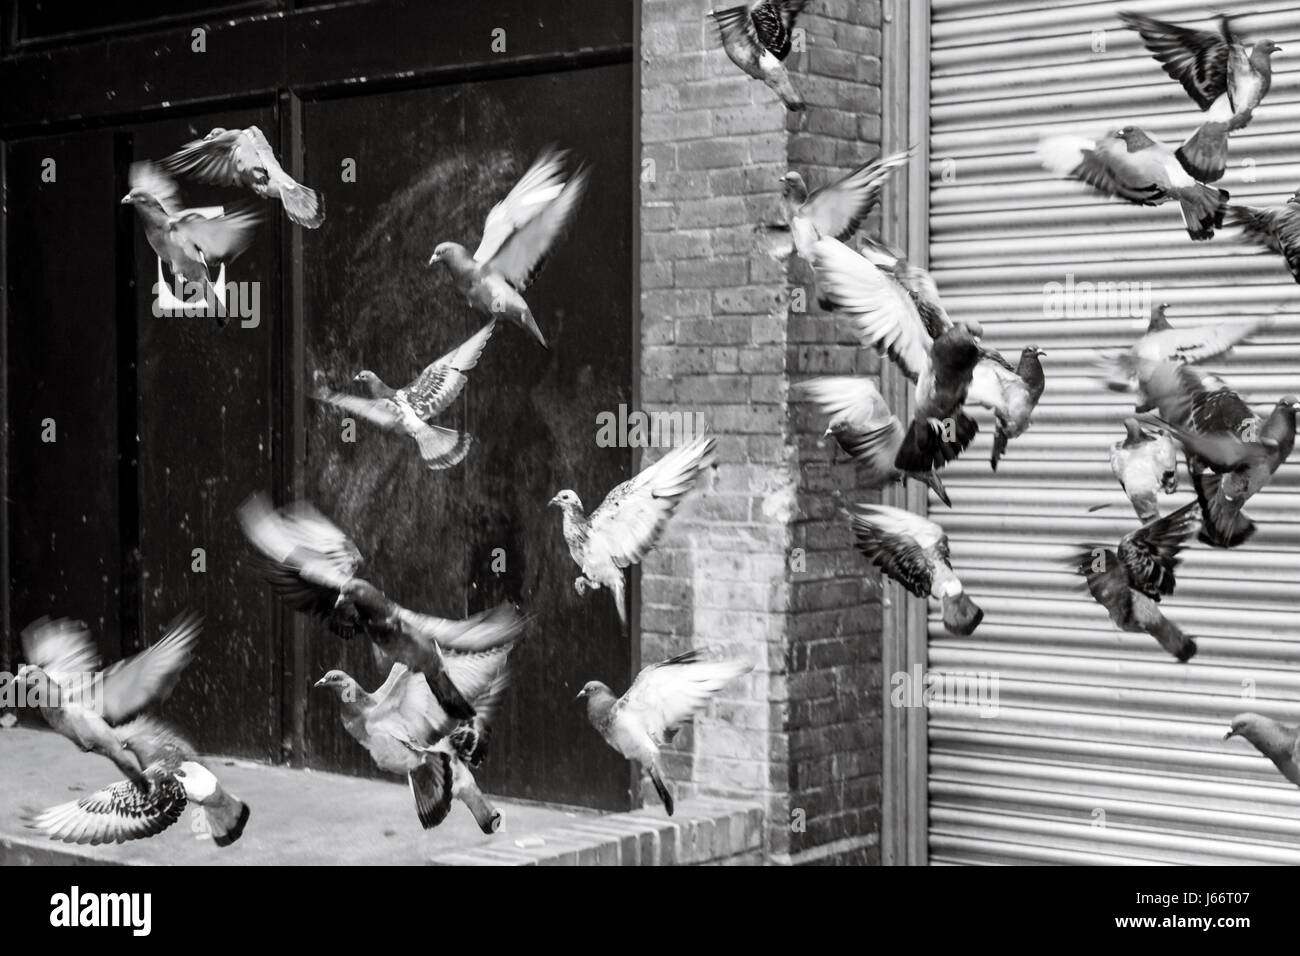 Black and white image of a flock of startled pigeons taking flight against a corrugated metal shutter and brick wall, London, UK Stock Photo